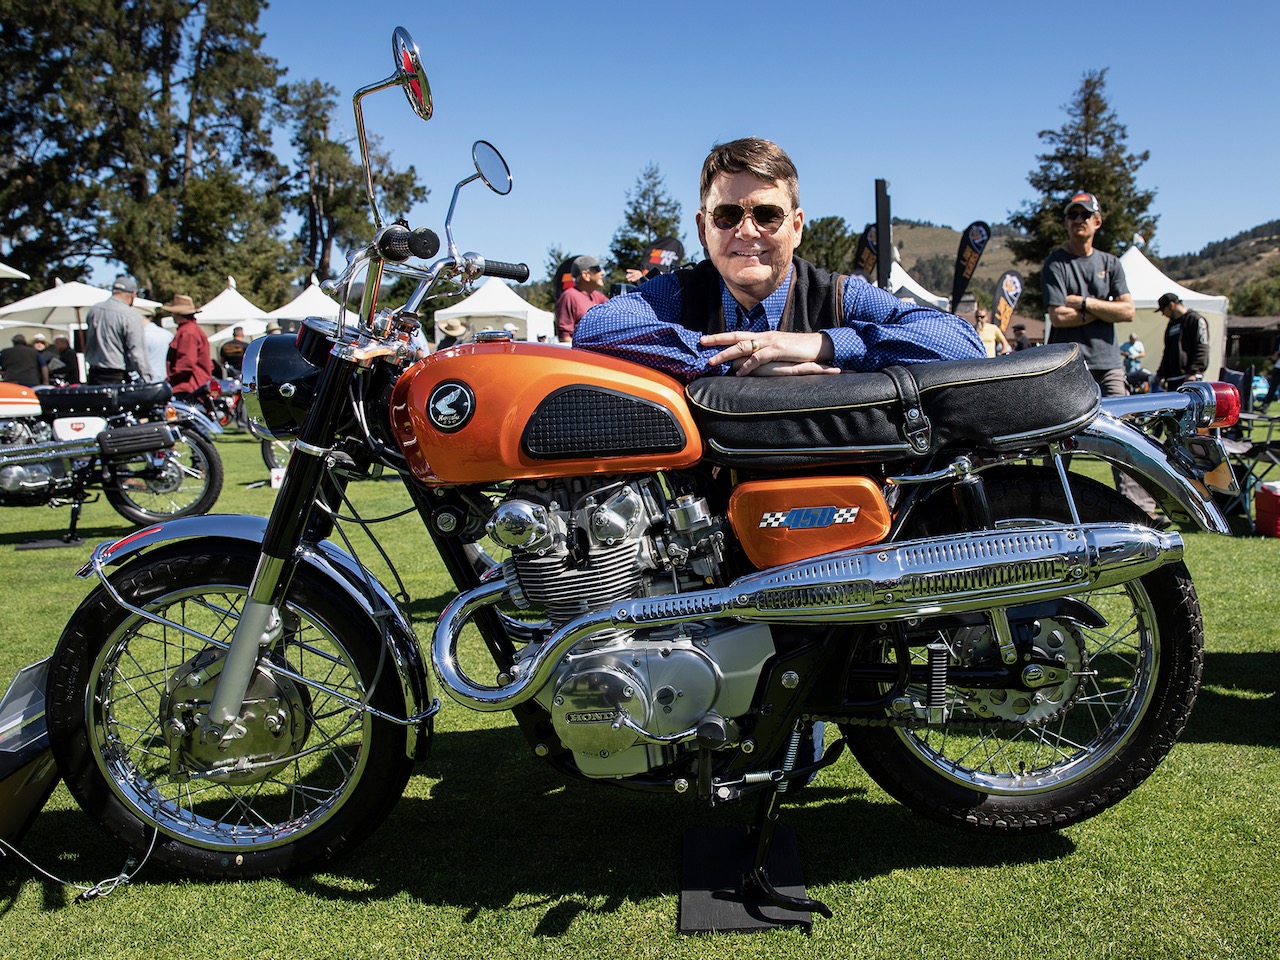 12TH ANNUAL QUAIL MOTORCYCLE GATHERING